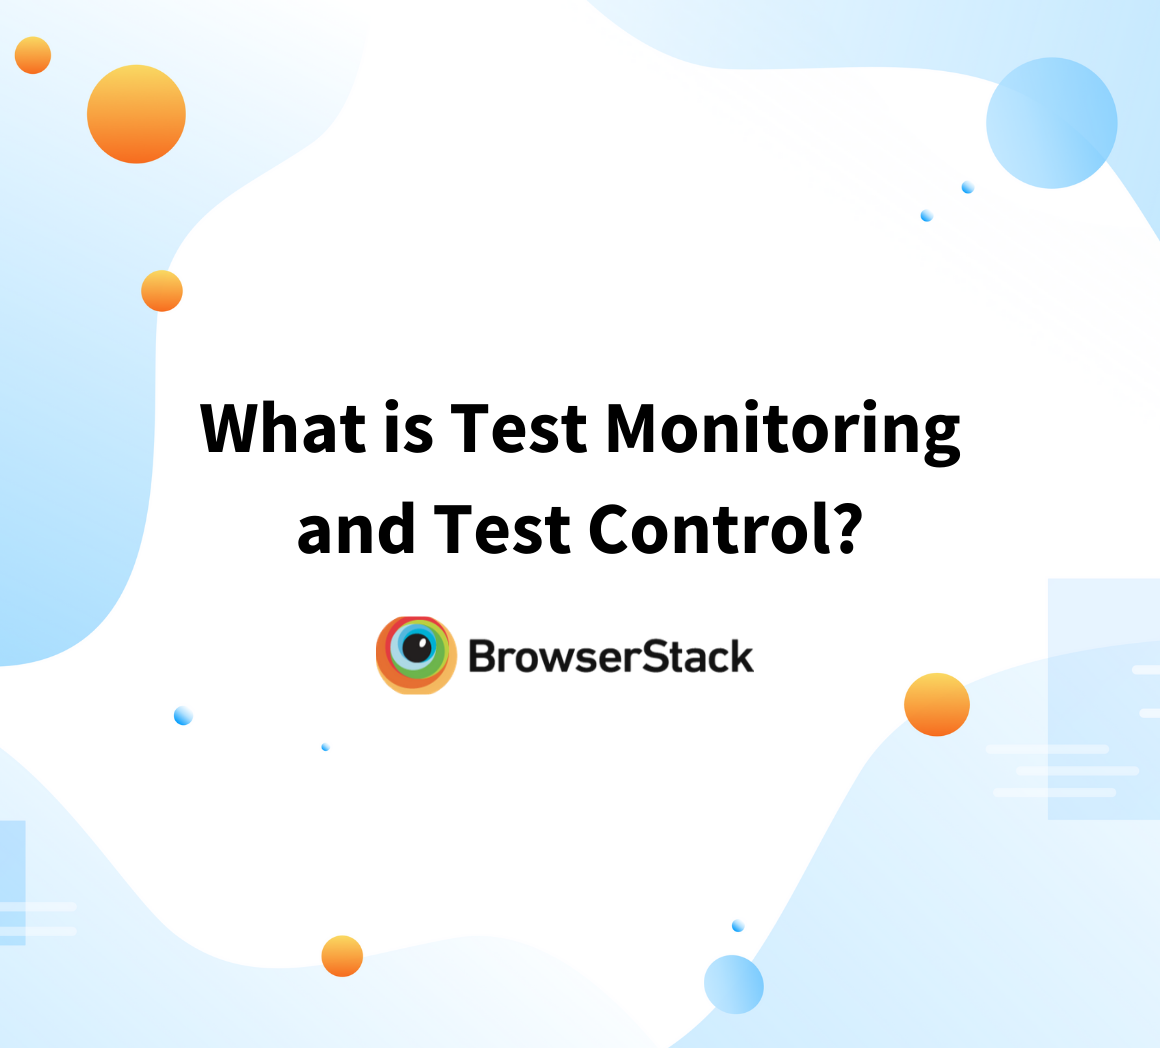 Test Monitoring & Test Control